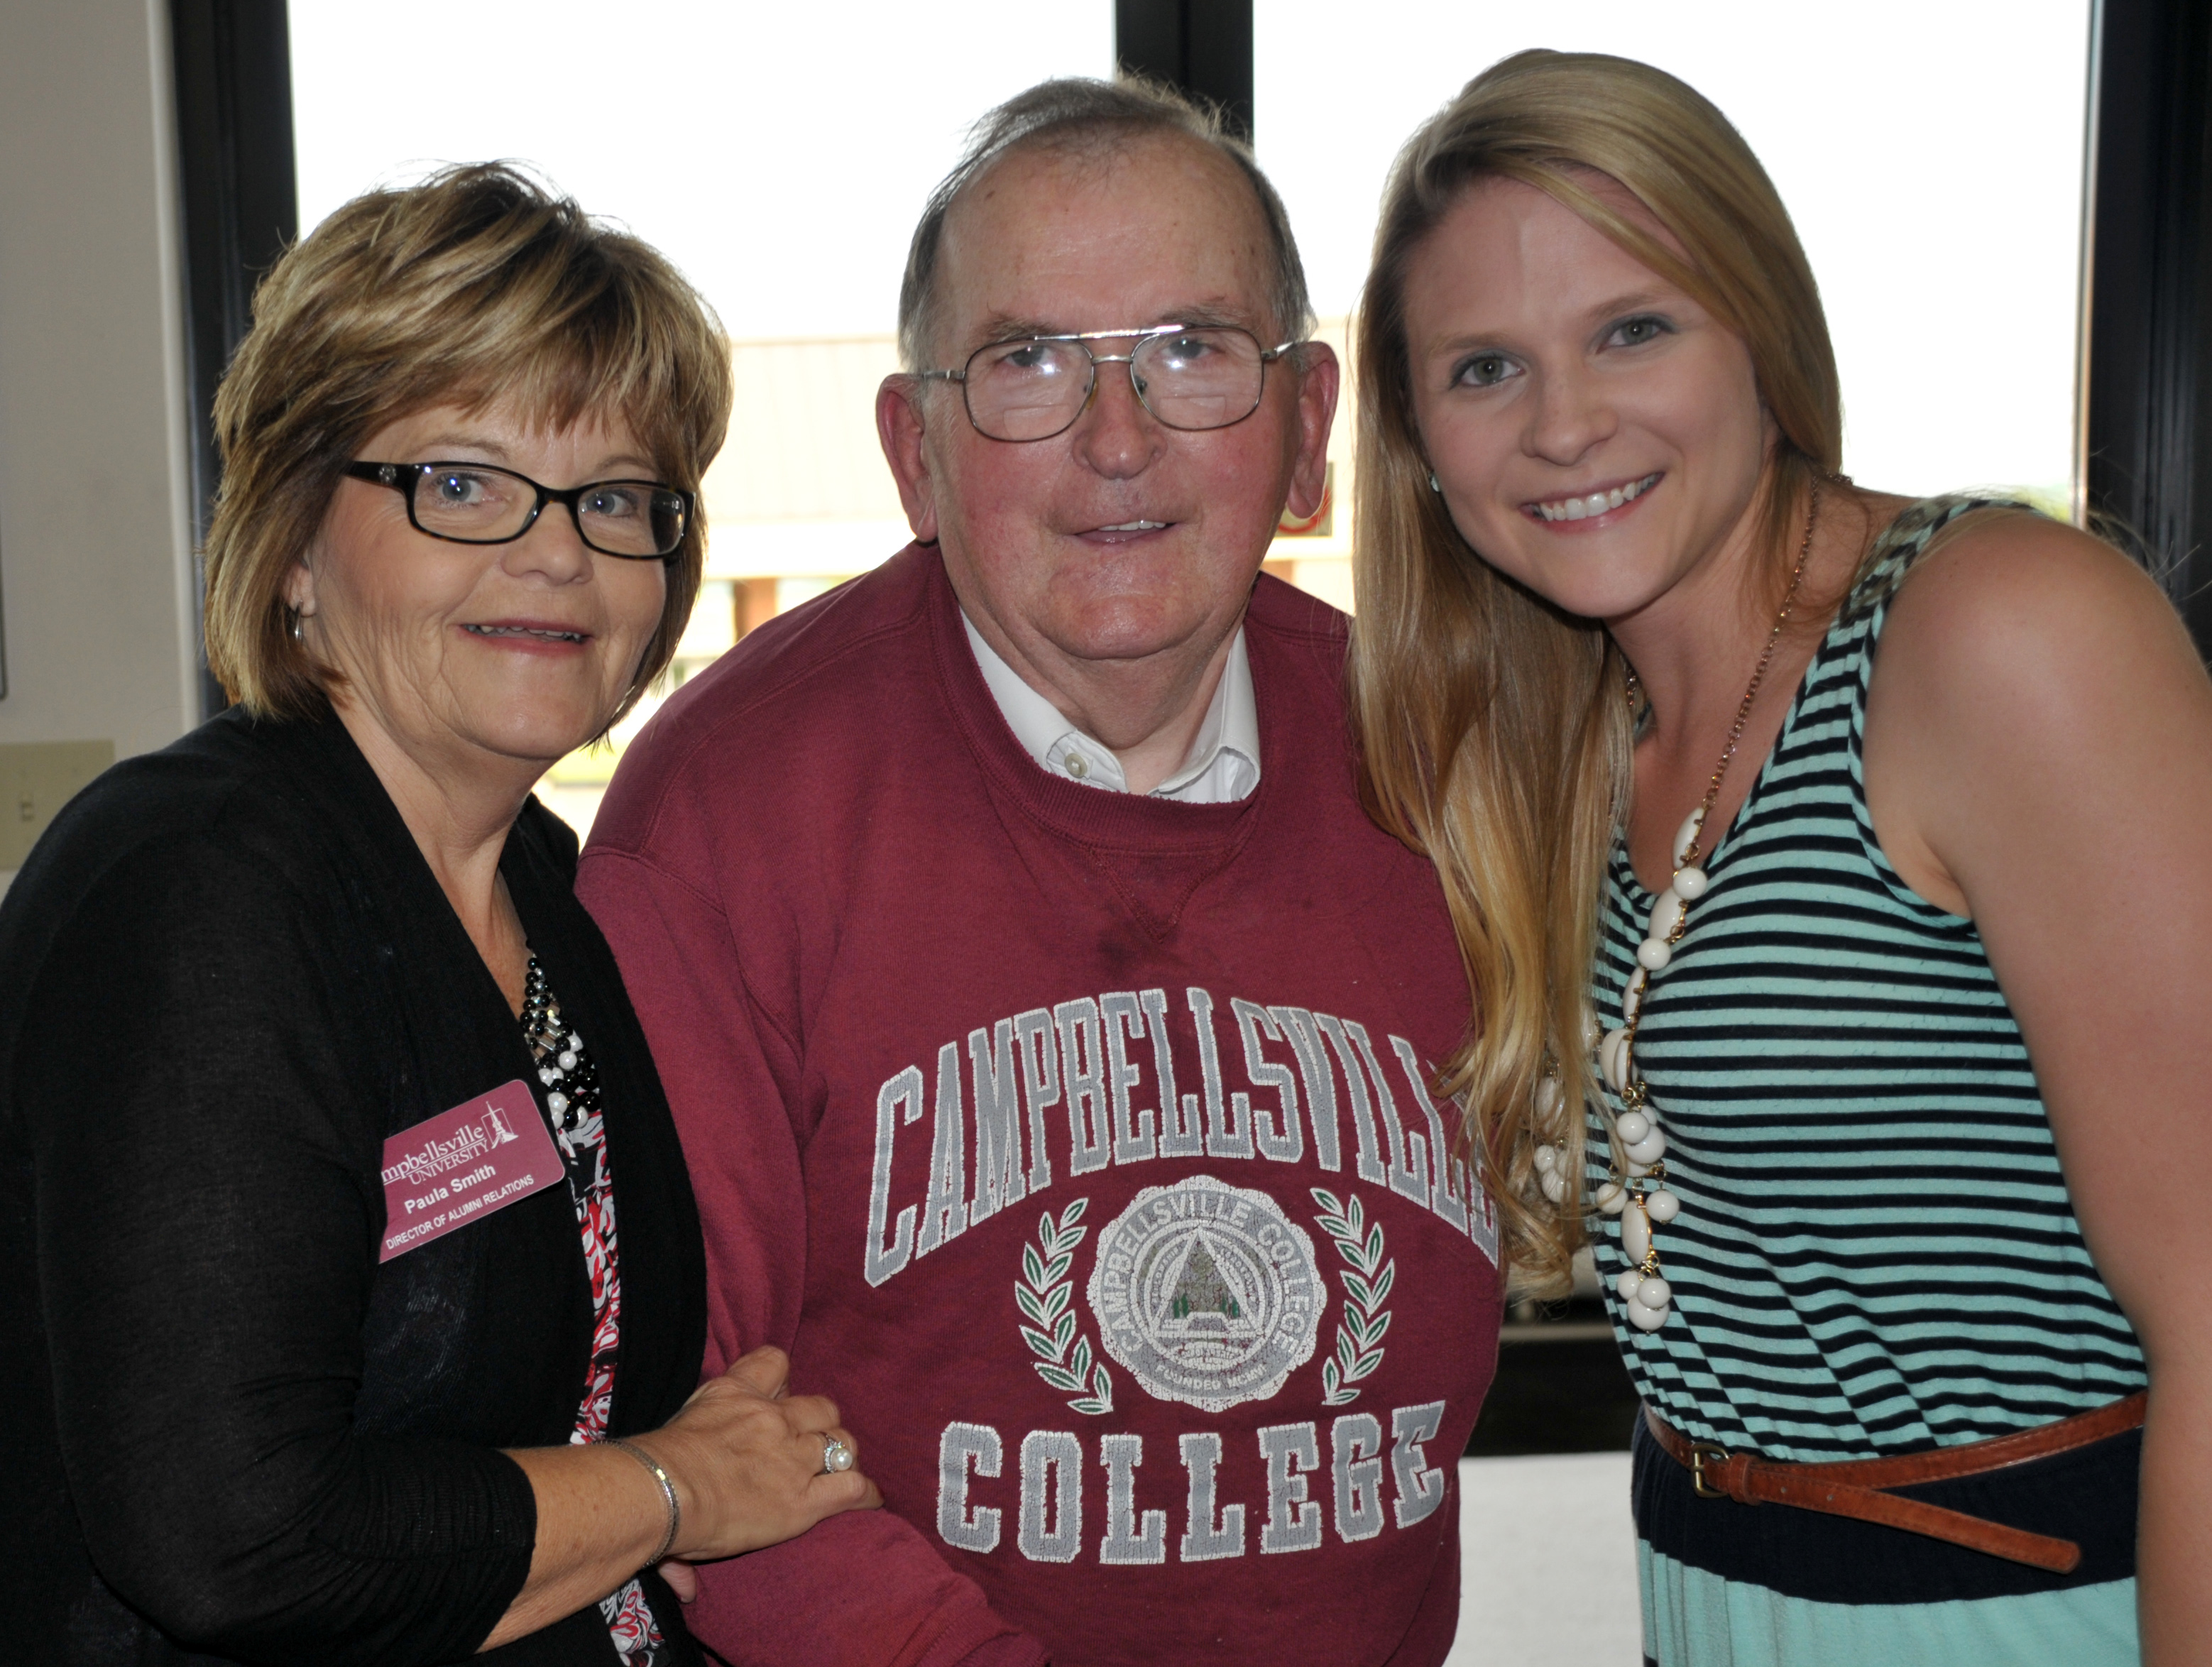 Paula Smith, left, CU director of alumni relations, is pictured with the Rev. Wayne B. Brickner, 1963 CU alumnus, and 2010 graduate Megan Massey at the “Campaign for the Commonwealth” dinner May 8 in Somerset at the Larry and Beverly Noe Education Center. (Campbellsville University Photo by Linda Waggene